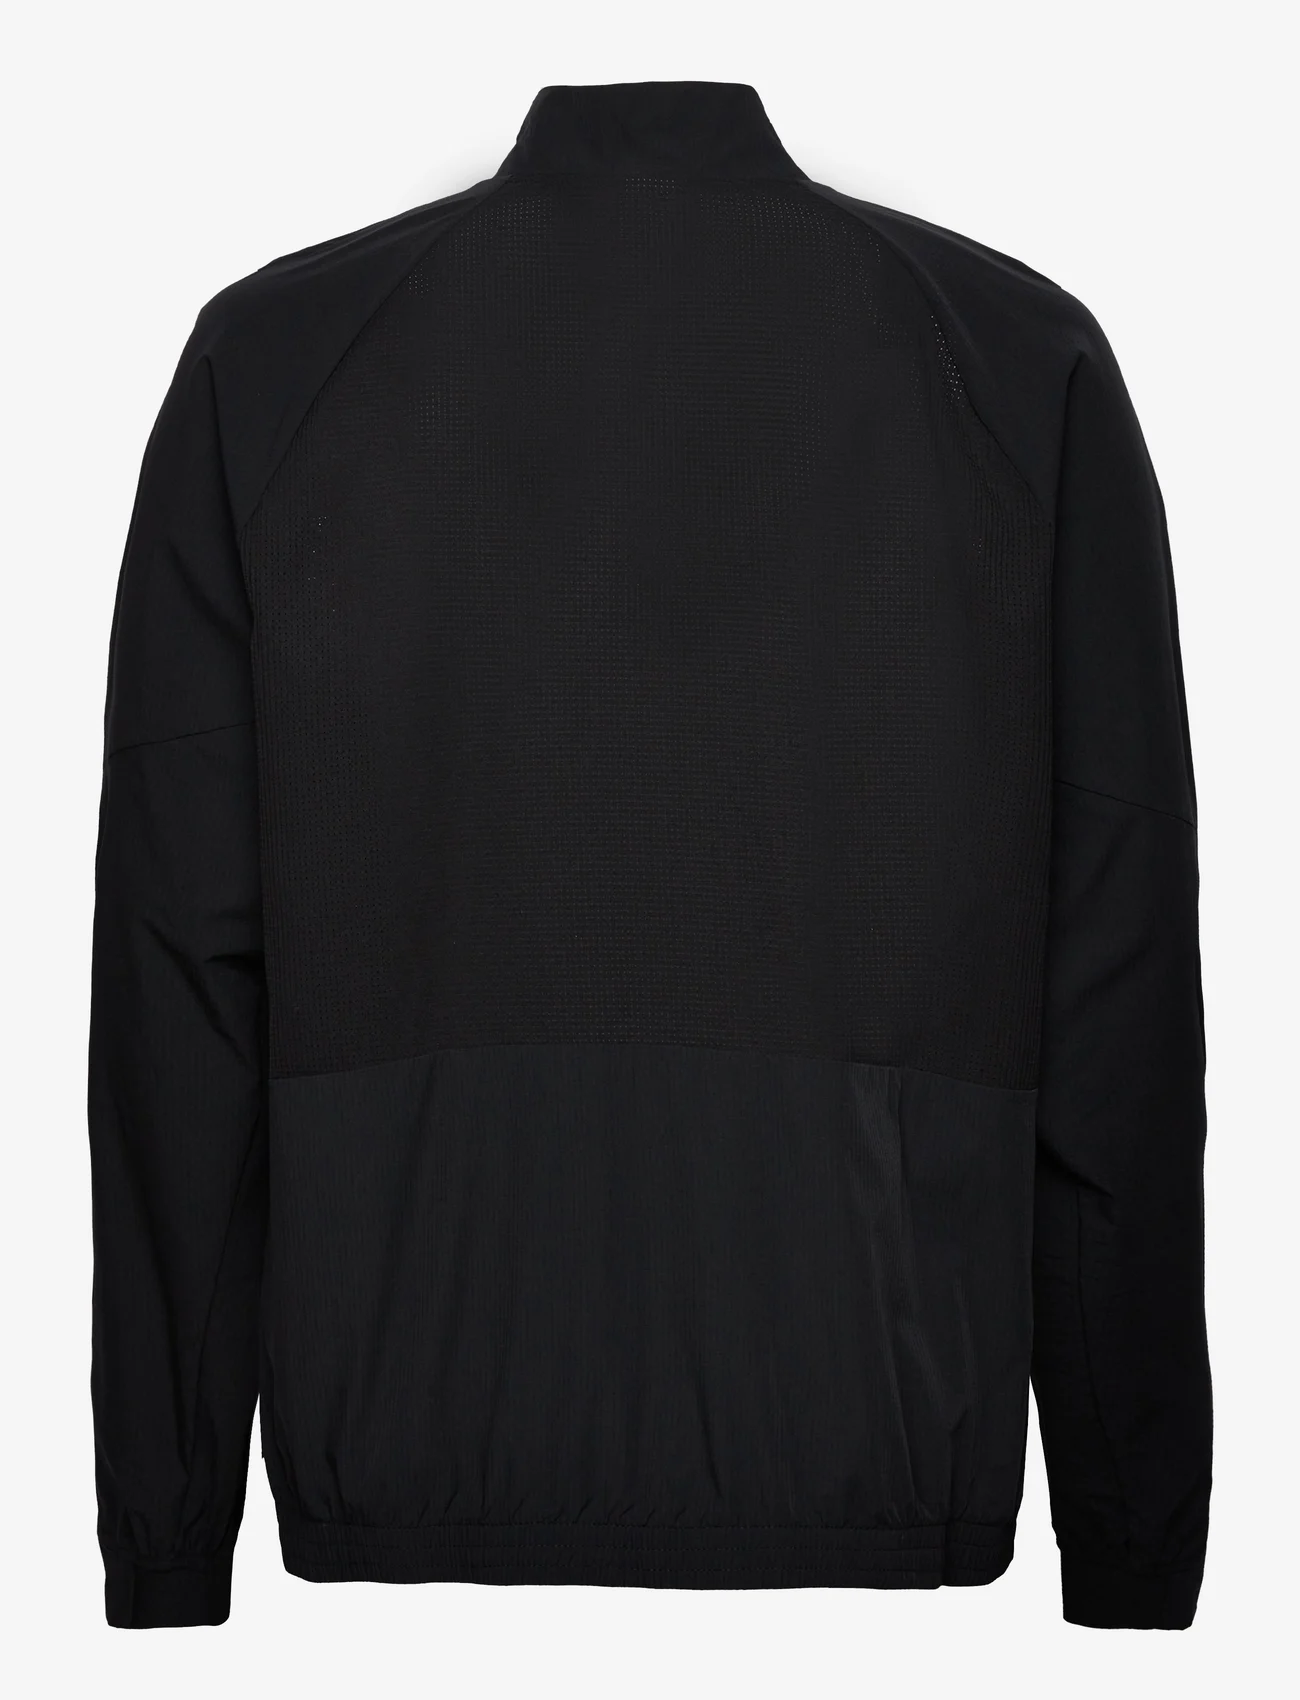 Superdry - STRETCH WOVEN TRACK TOP - black - 1